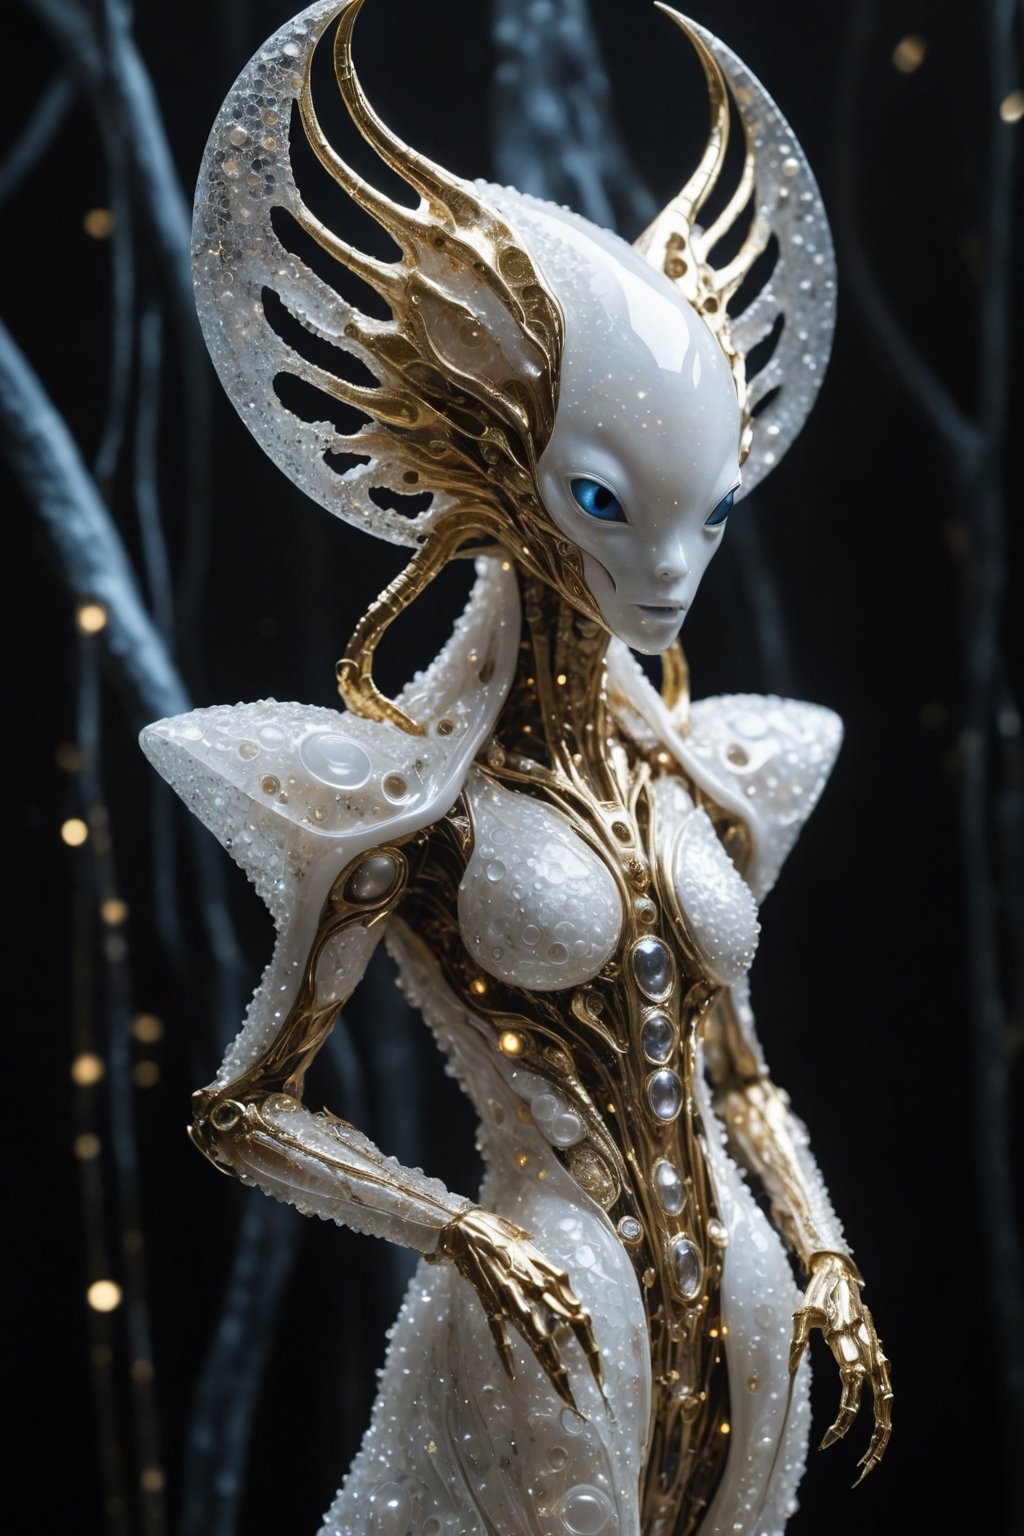 A striking and otherworldly robotic alien, its form crafted from an intriguing blend of pearlescent Porcelyn and soft, translucent bubble wrap. The creature stands upright, with a sleek, organic design that seems to flow seamlessly from its head to its tail. Its body is adorned with an array of glowing lights, like tiny stars twinkling against the night sky, while strategically placed pockets of bubble wrap add a unique touch of whimsy and texture. The alien's face is a study in contrasts, with metallic, almost cold features offset by large, expressive eyes that seem to hold the wisdom of countless galaxies. It stands in a ((dimly lit chamber)), its presence commanding attention as it gazes out at the unseen world beyond. The air around it crackles with energy and the sense of something truly extraordinary, a being that exists between the worlds of machine and organism, art and science, fantasy and reality.,futuristic alien